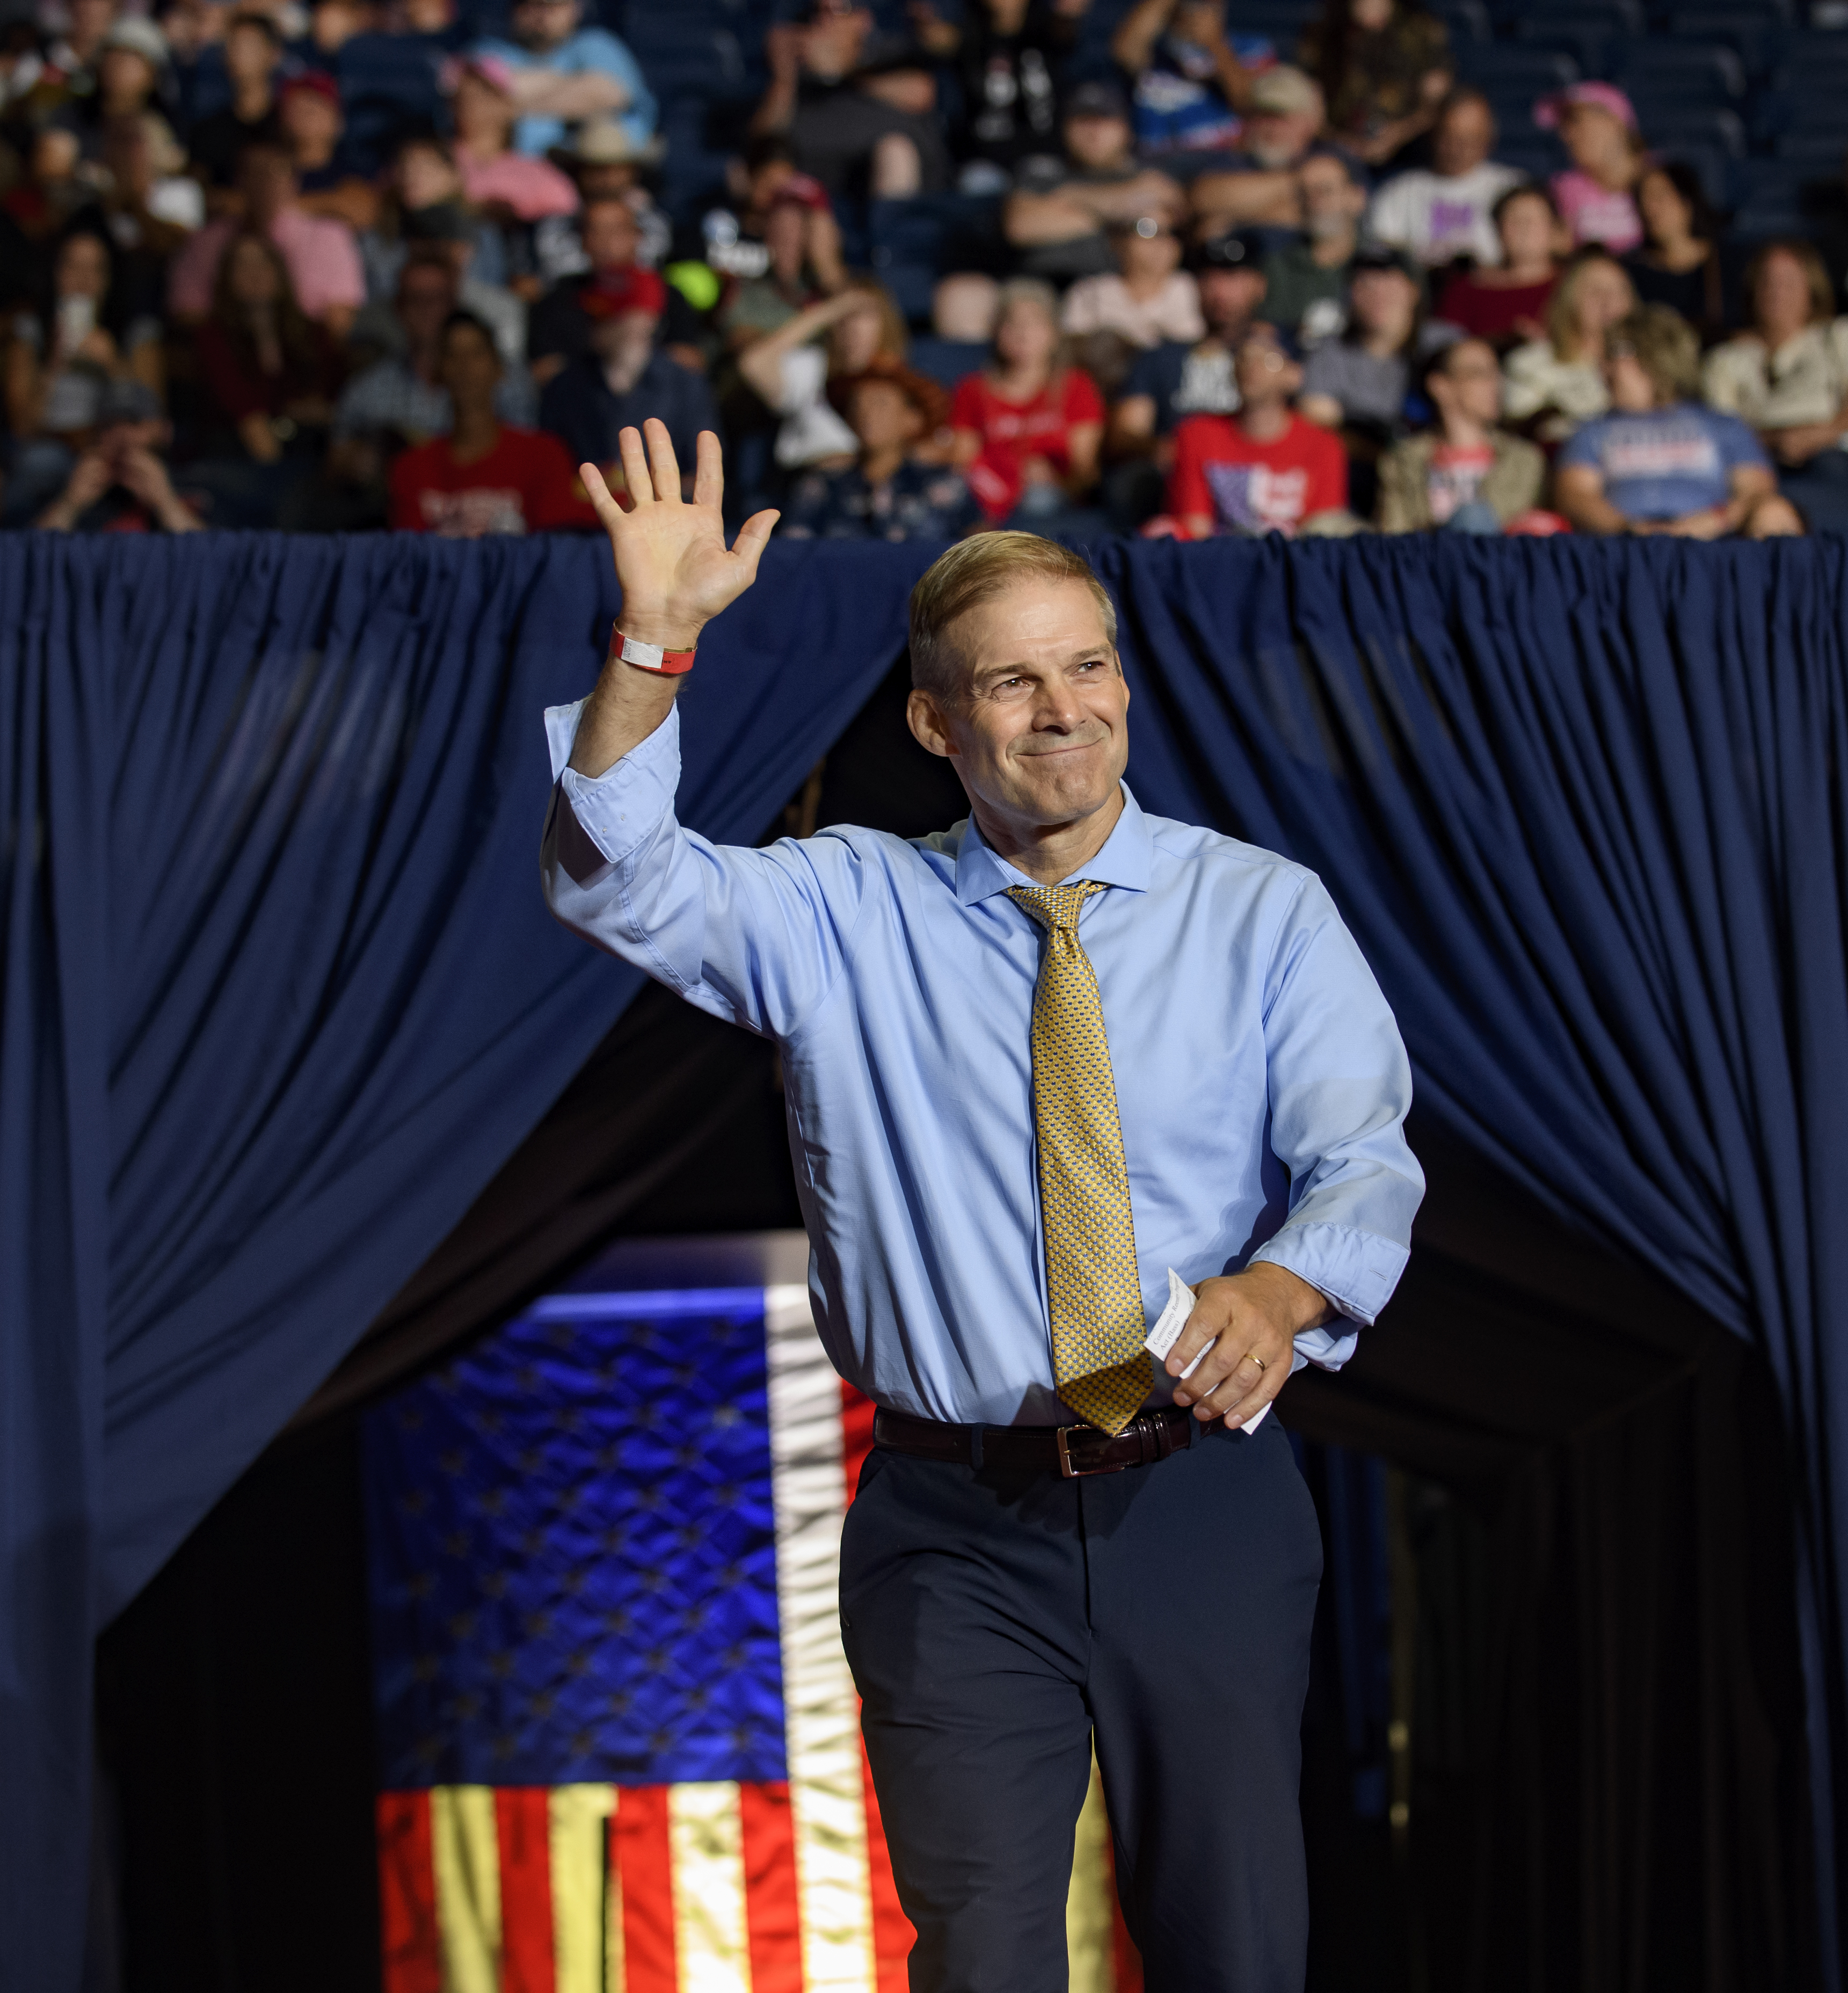 Jim Jordan (R-OH) speaks to supporters at a Save America Rally at the Covelli Centre on September 17, 2022, in Youngstown, Ohio. | Source: Getty Images